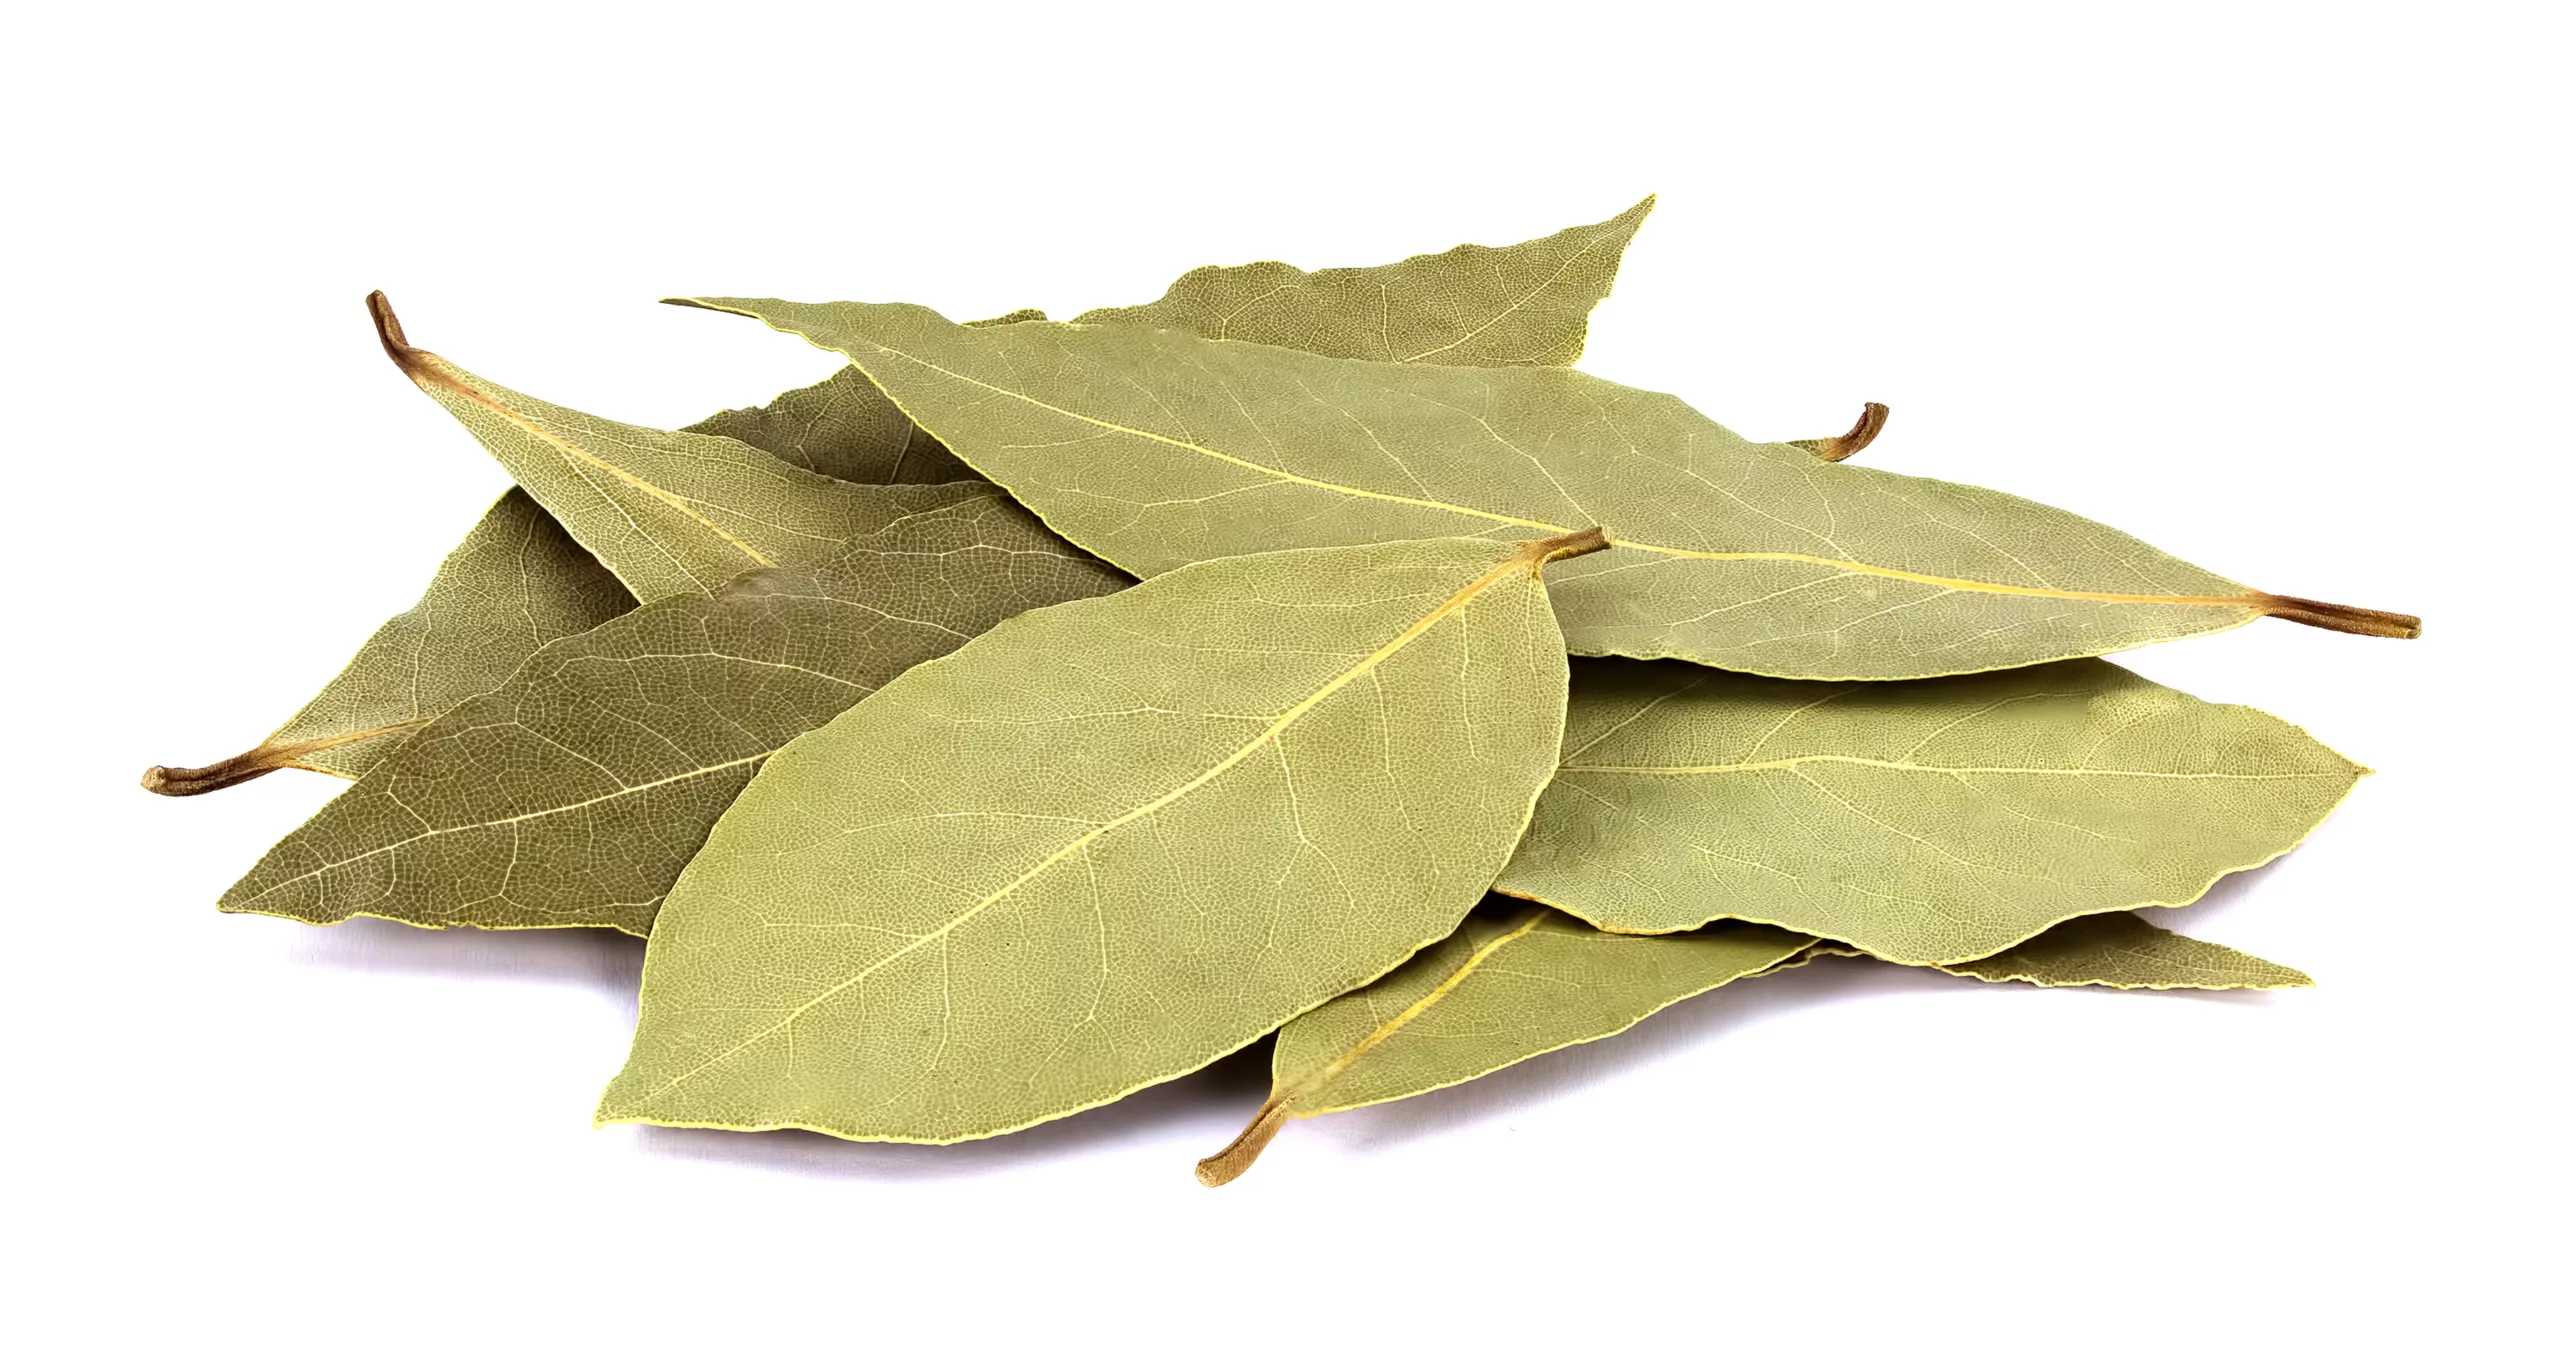 can dogs eat bay leaves